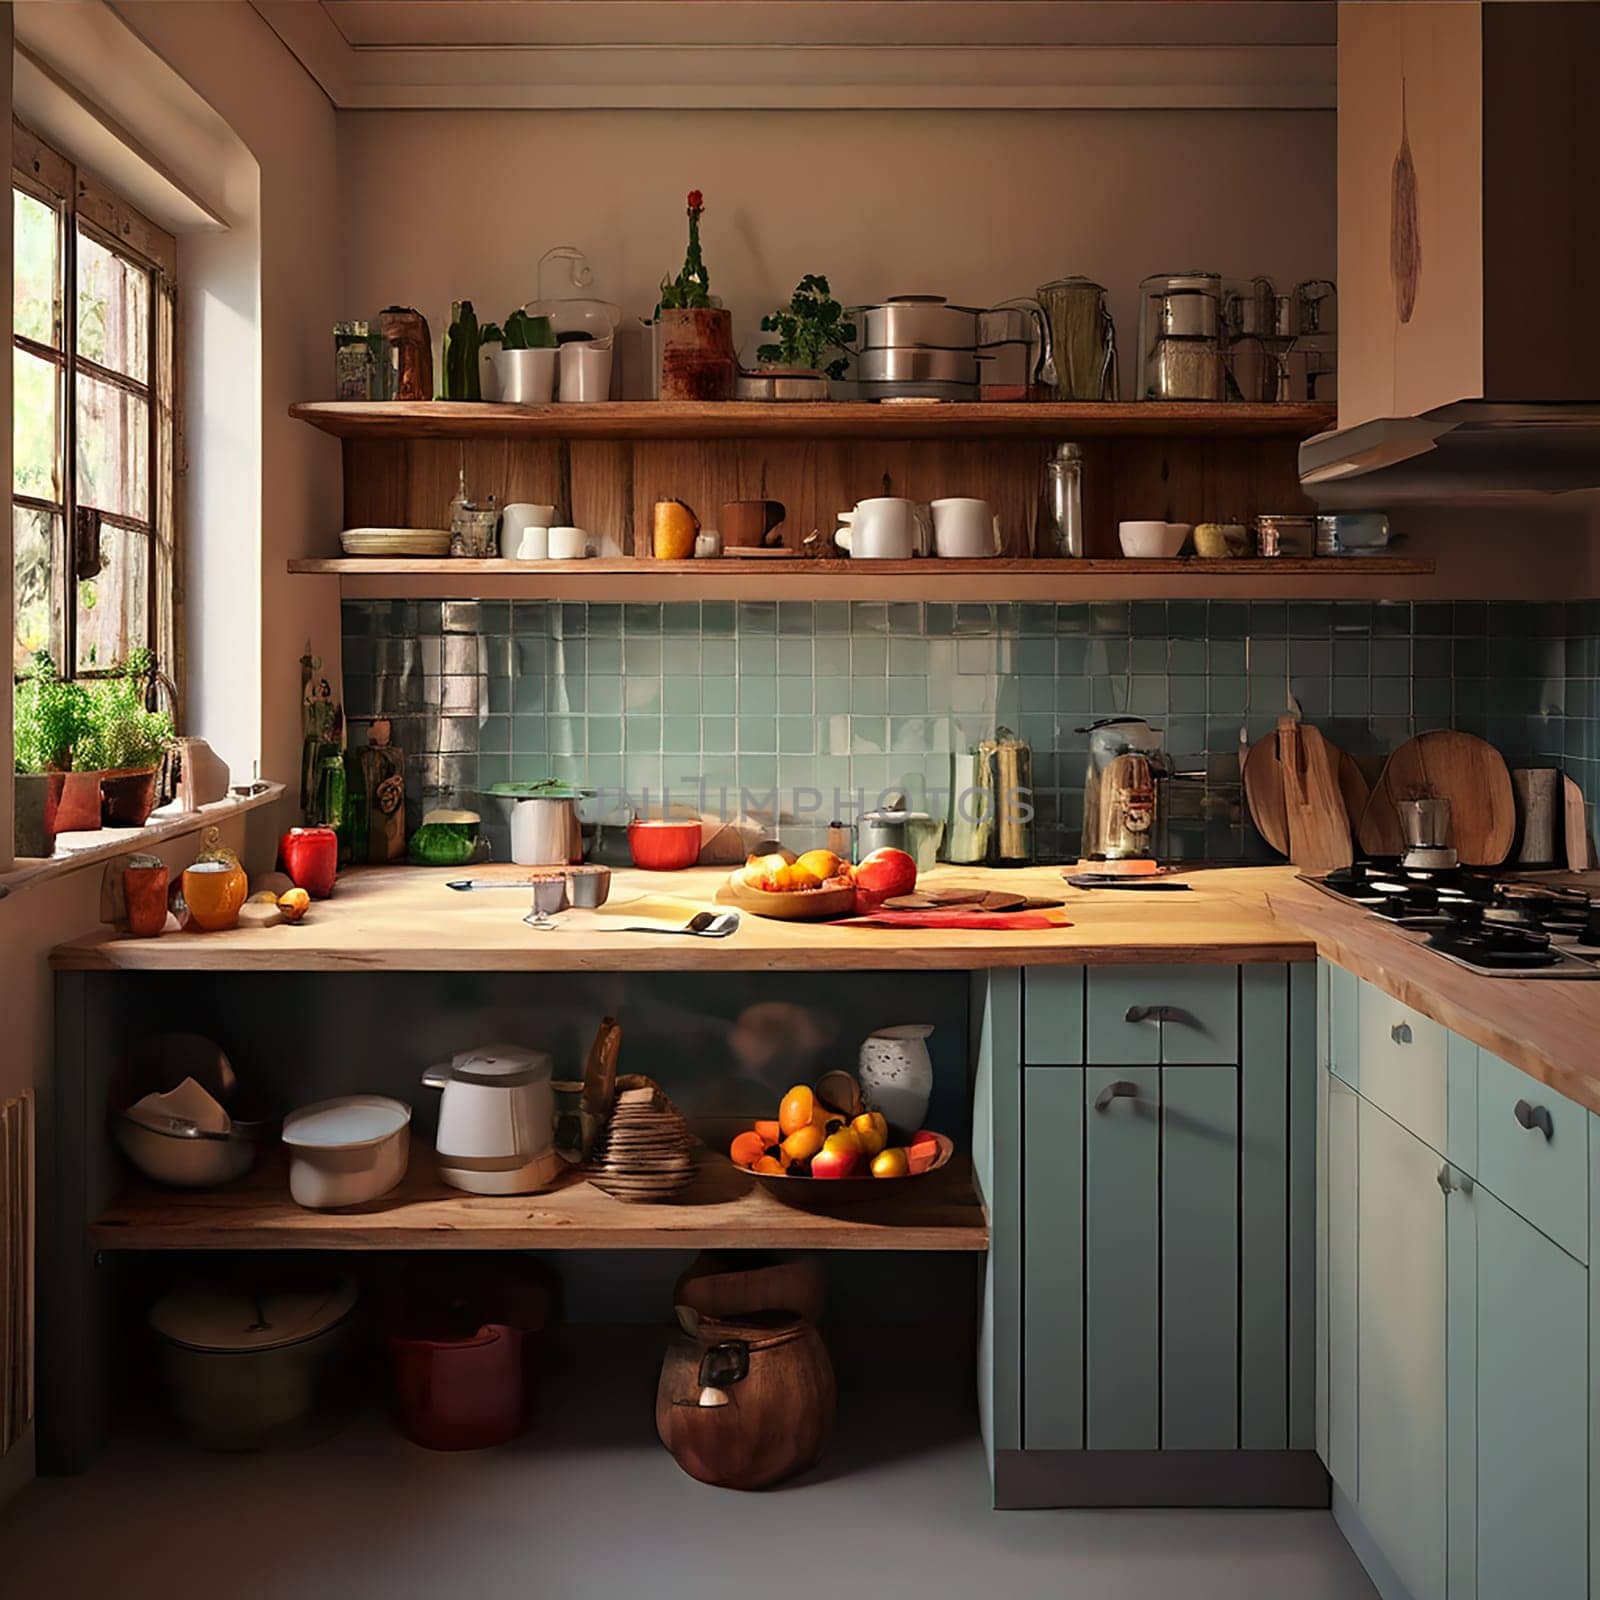 Designing a Family-Friendly Kitchen: Practicality with Style by Petrichor